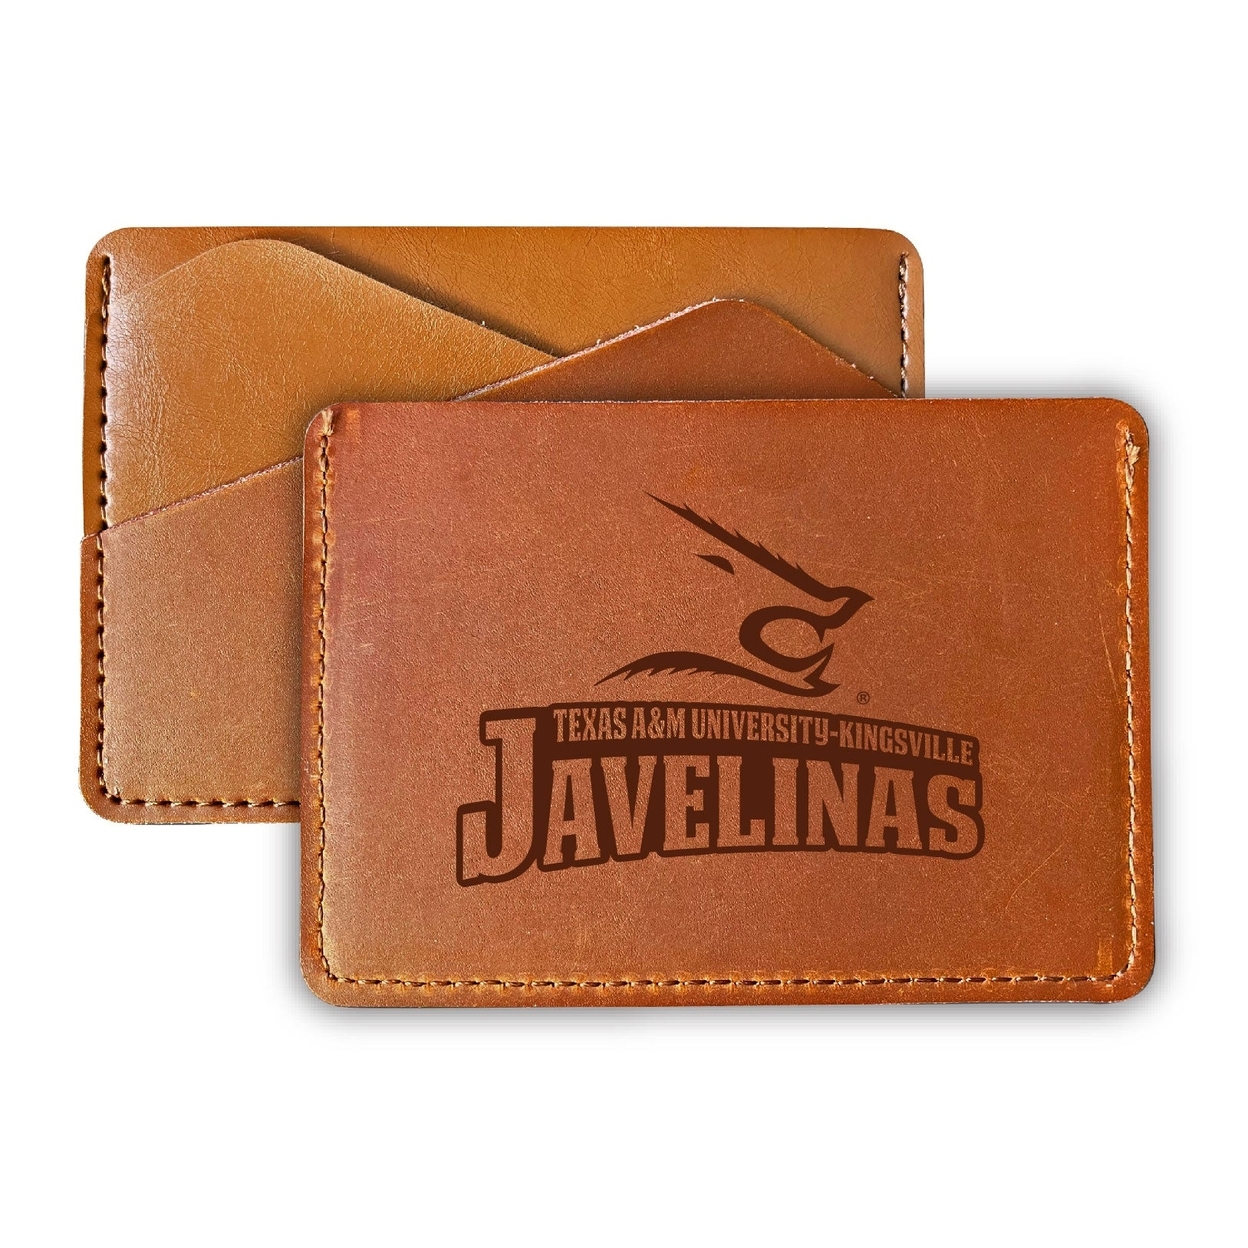 Texas A&M Kingsville Javelinas College Leather Card Holder Wallet